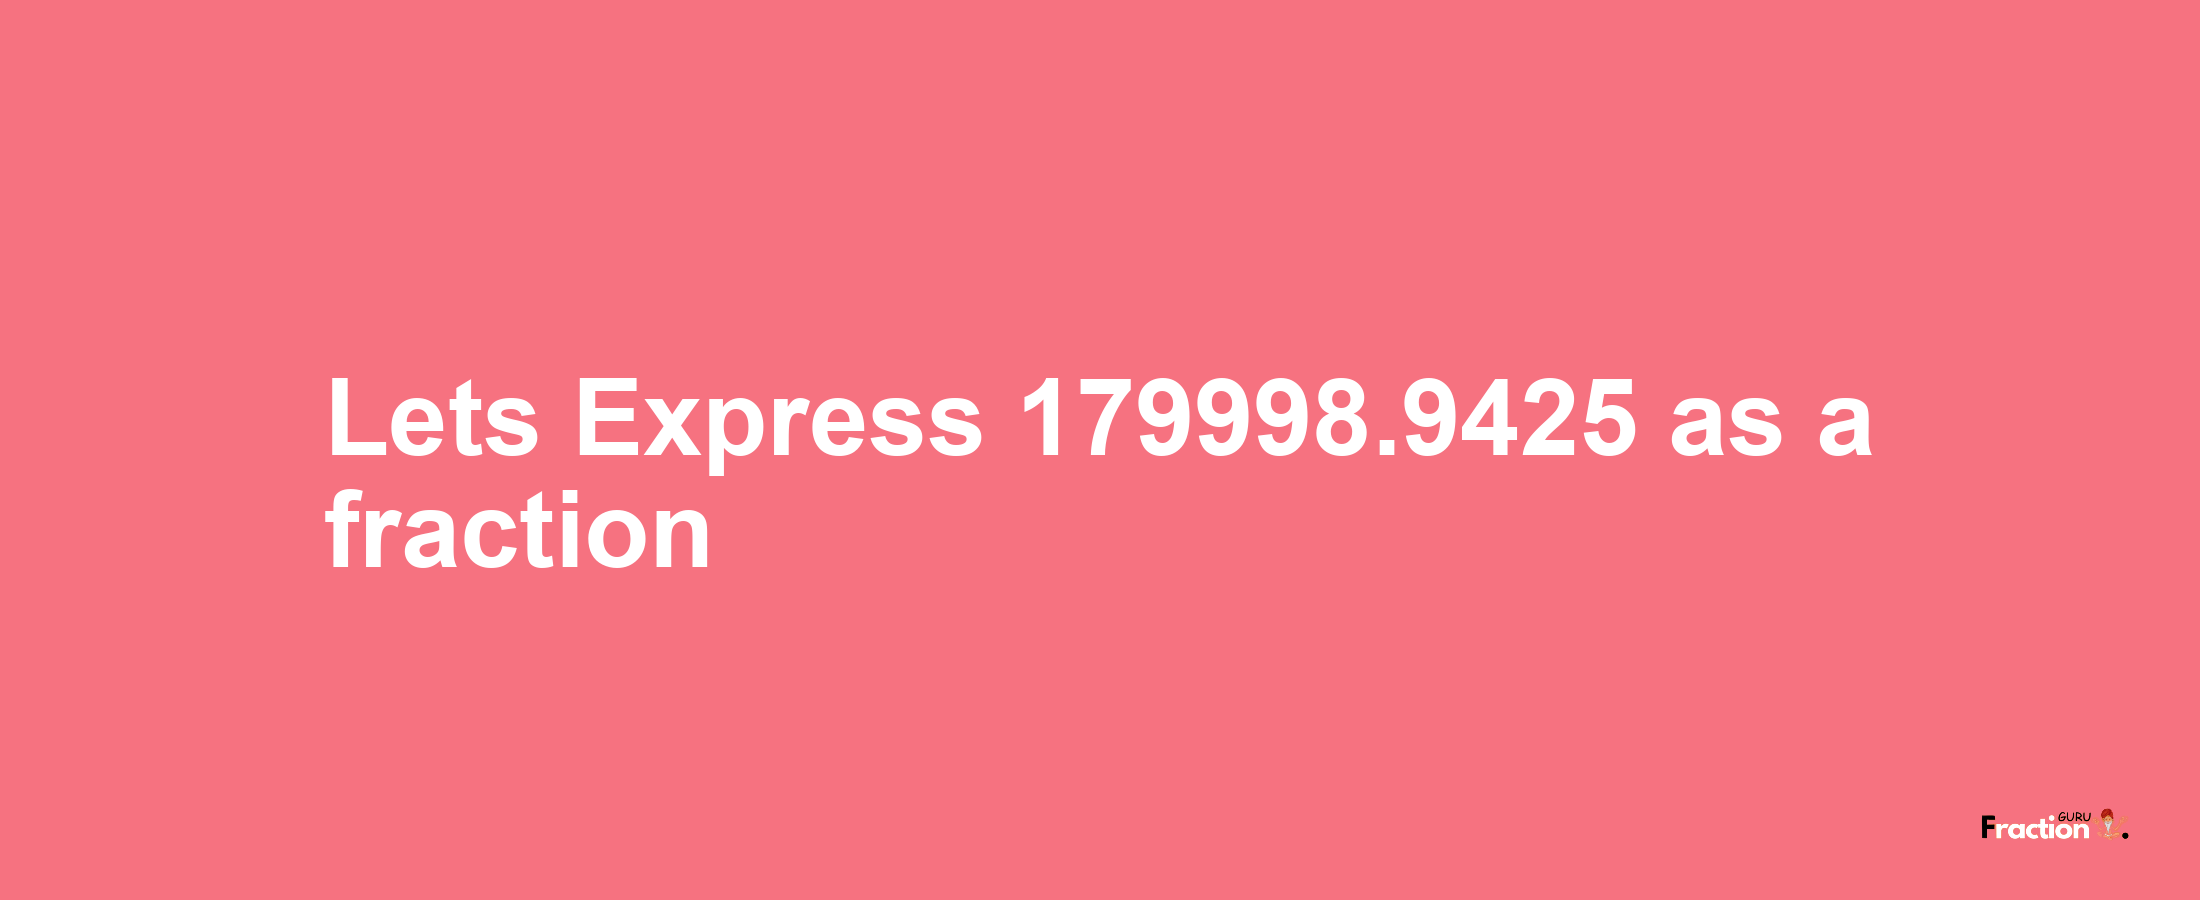 Lets Express 179998.9425 as afraction